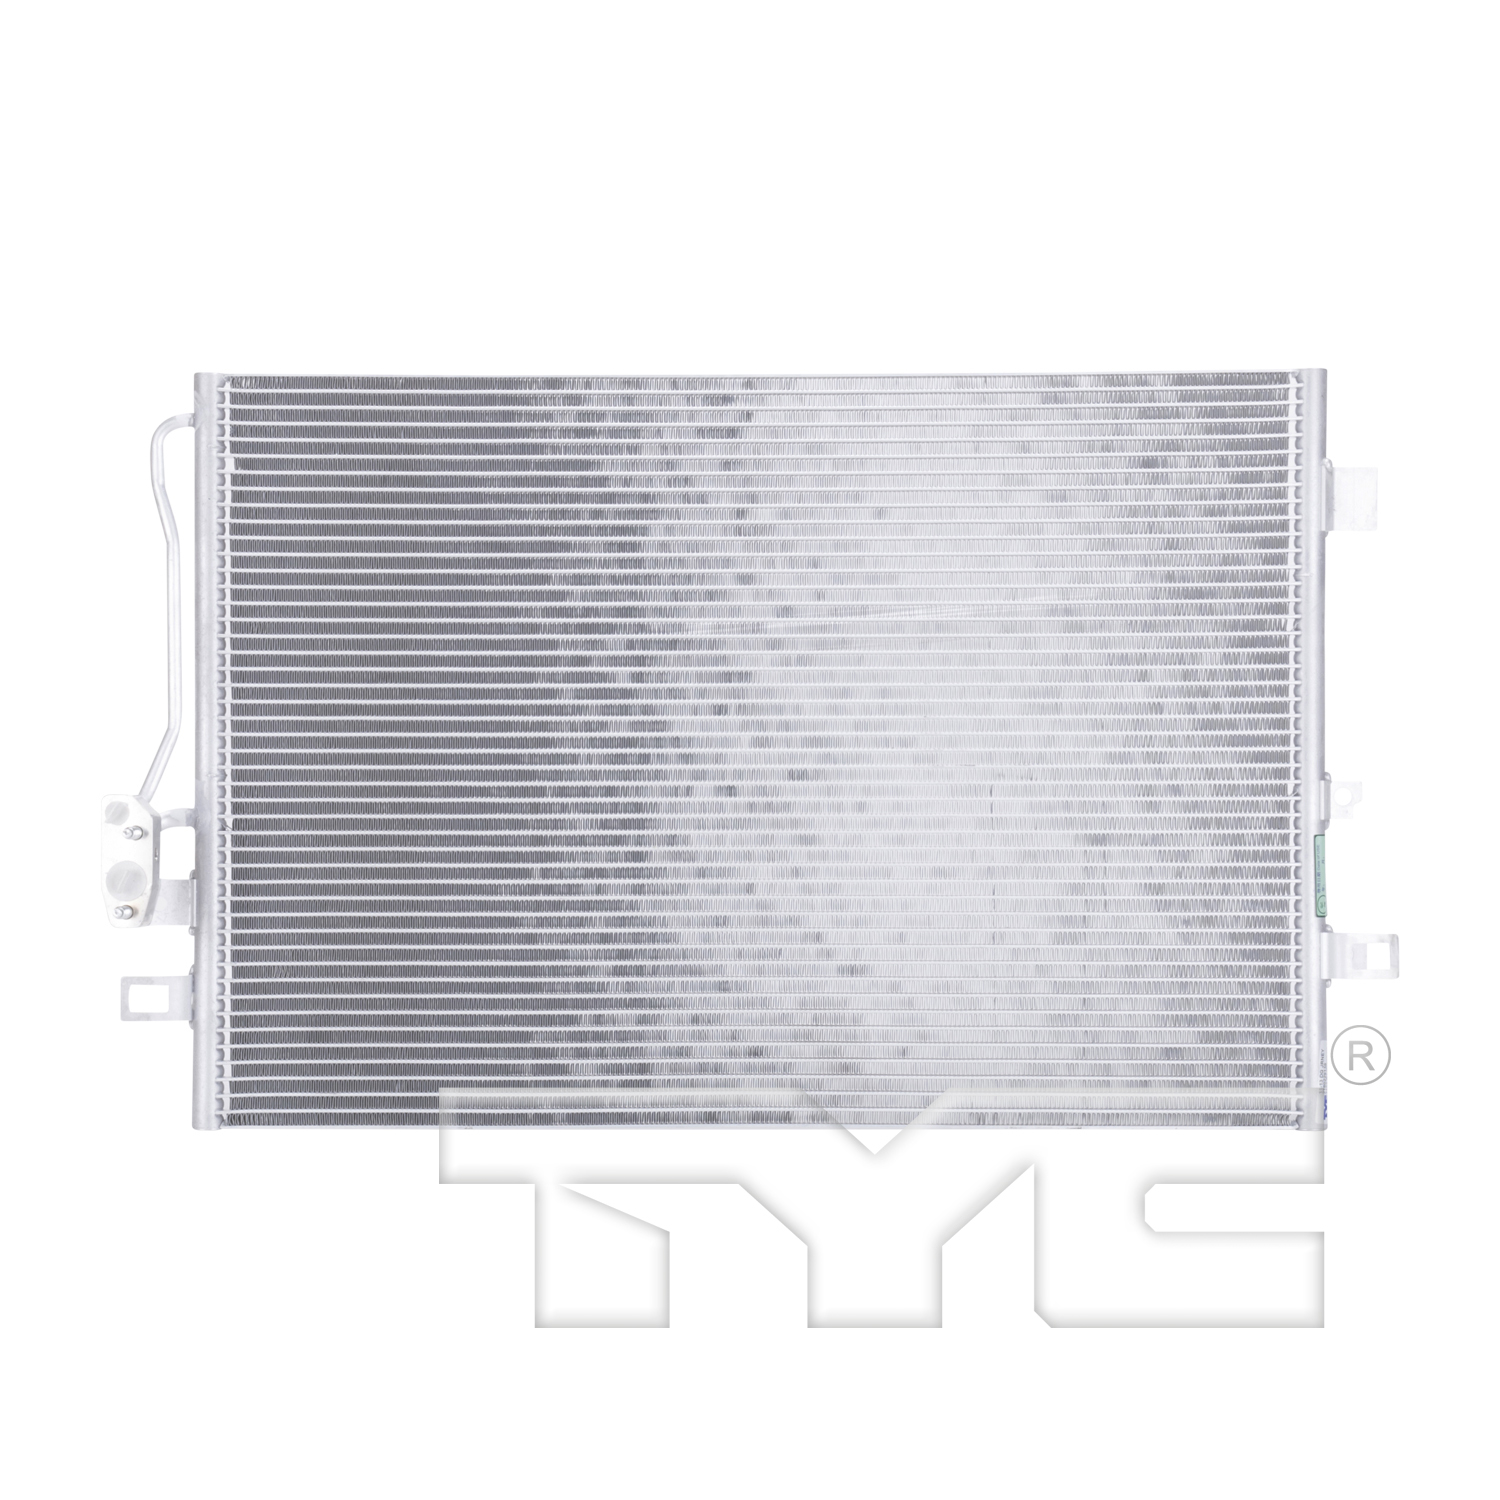 Aftermarket AC CONDENSERS for DODGE - JOURNEY, JOURNEY,11-20,Air conditioning condenser